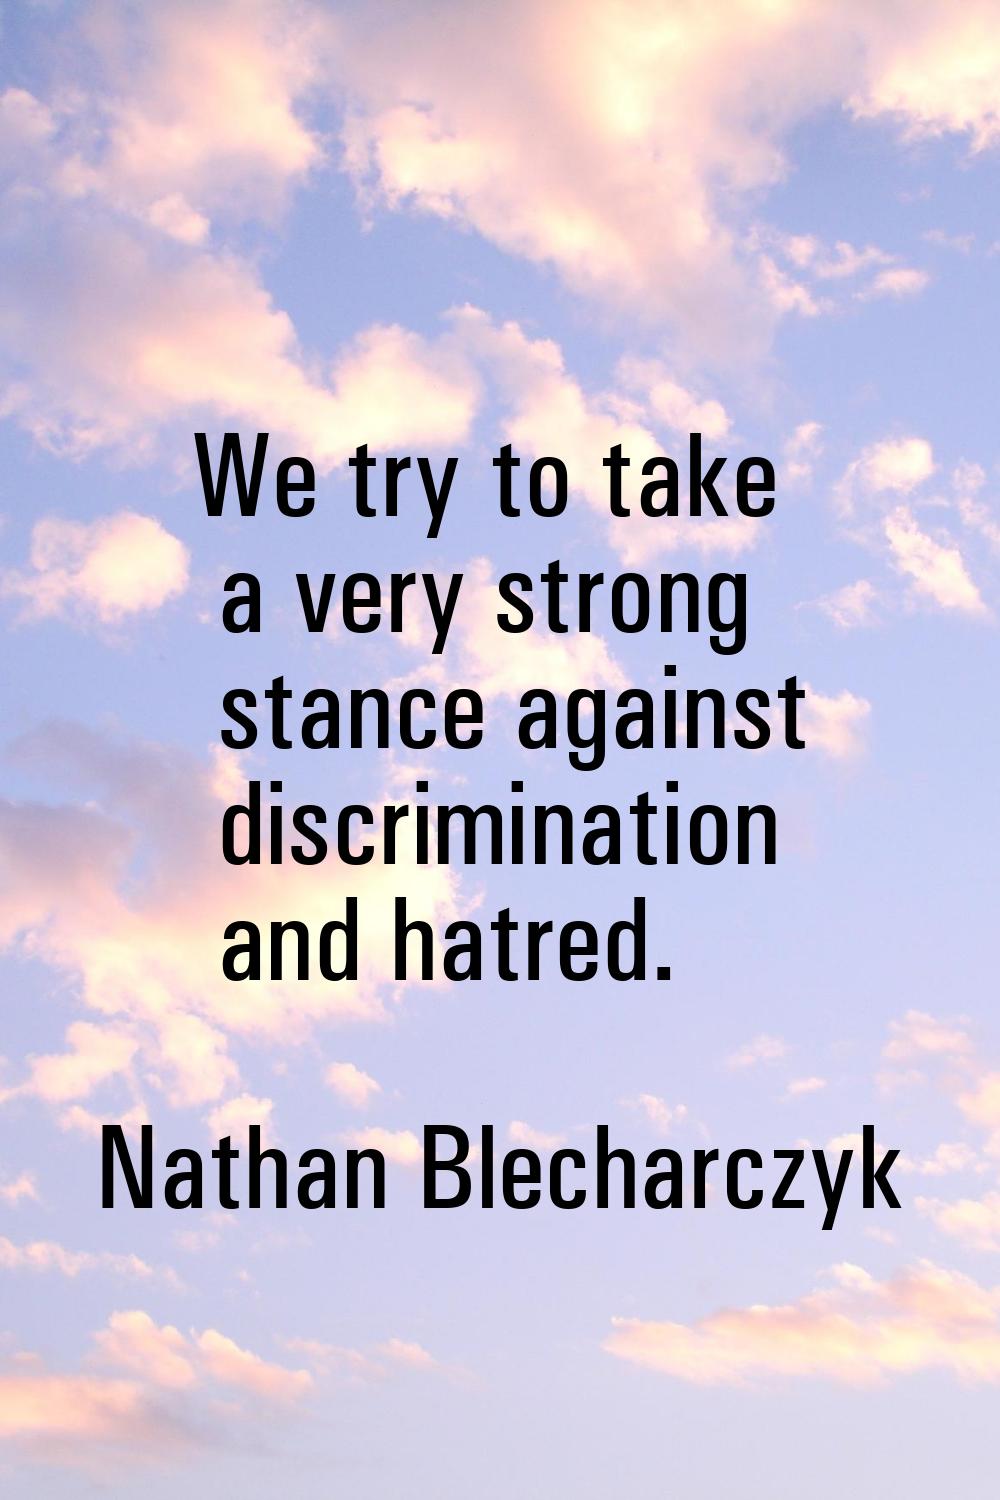 We try to take a very strong stance against discrimination and hatred.